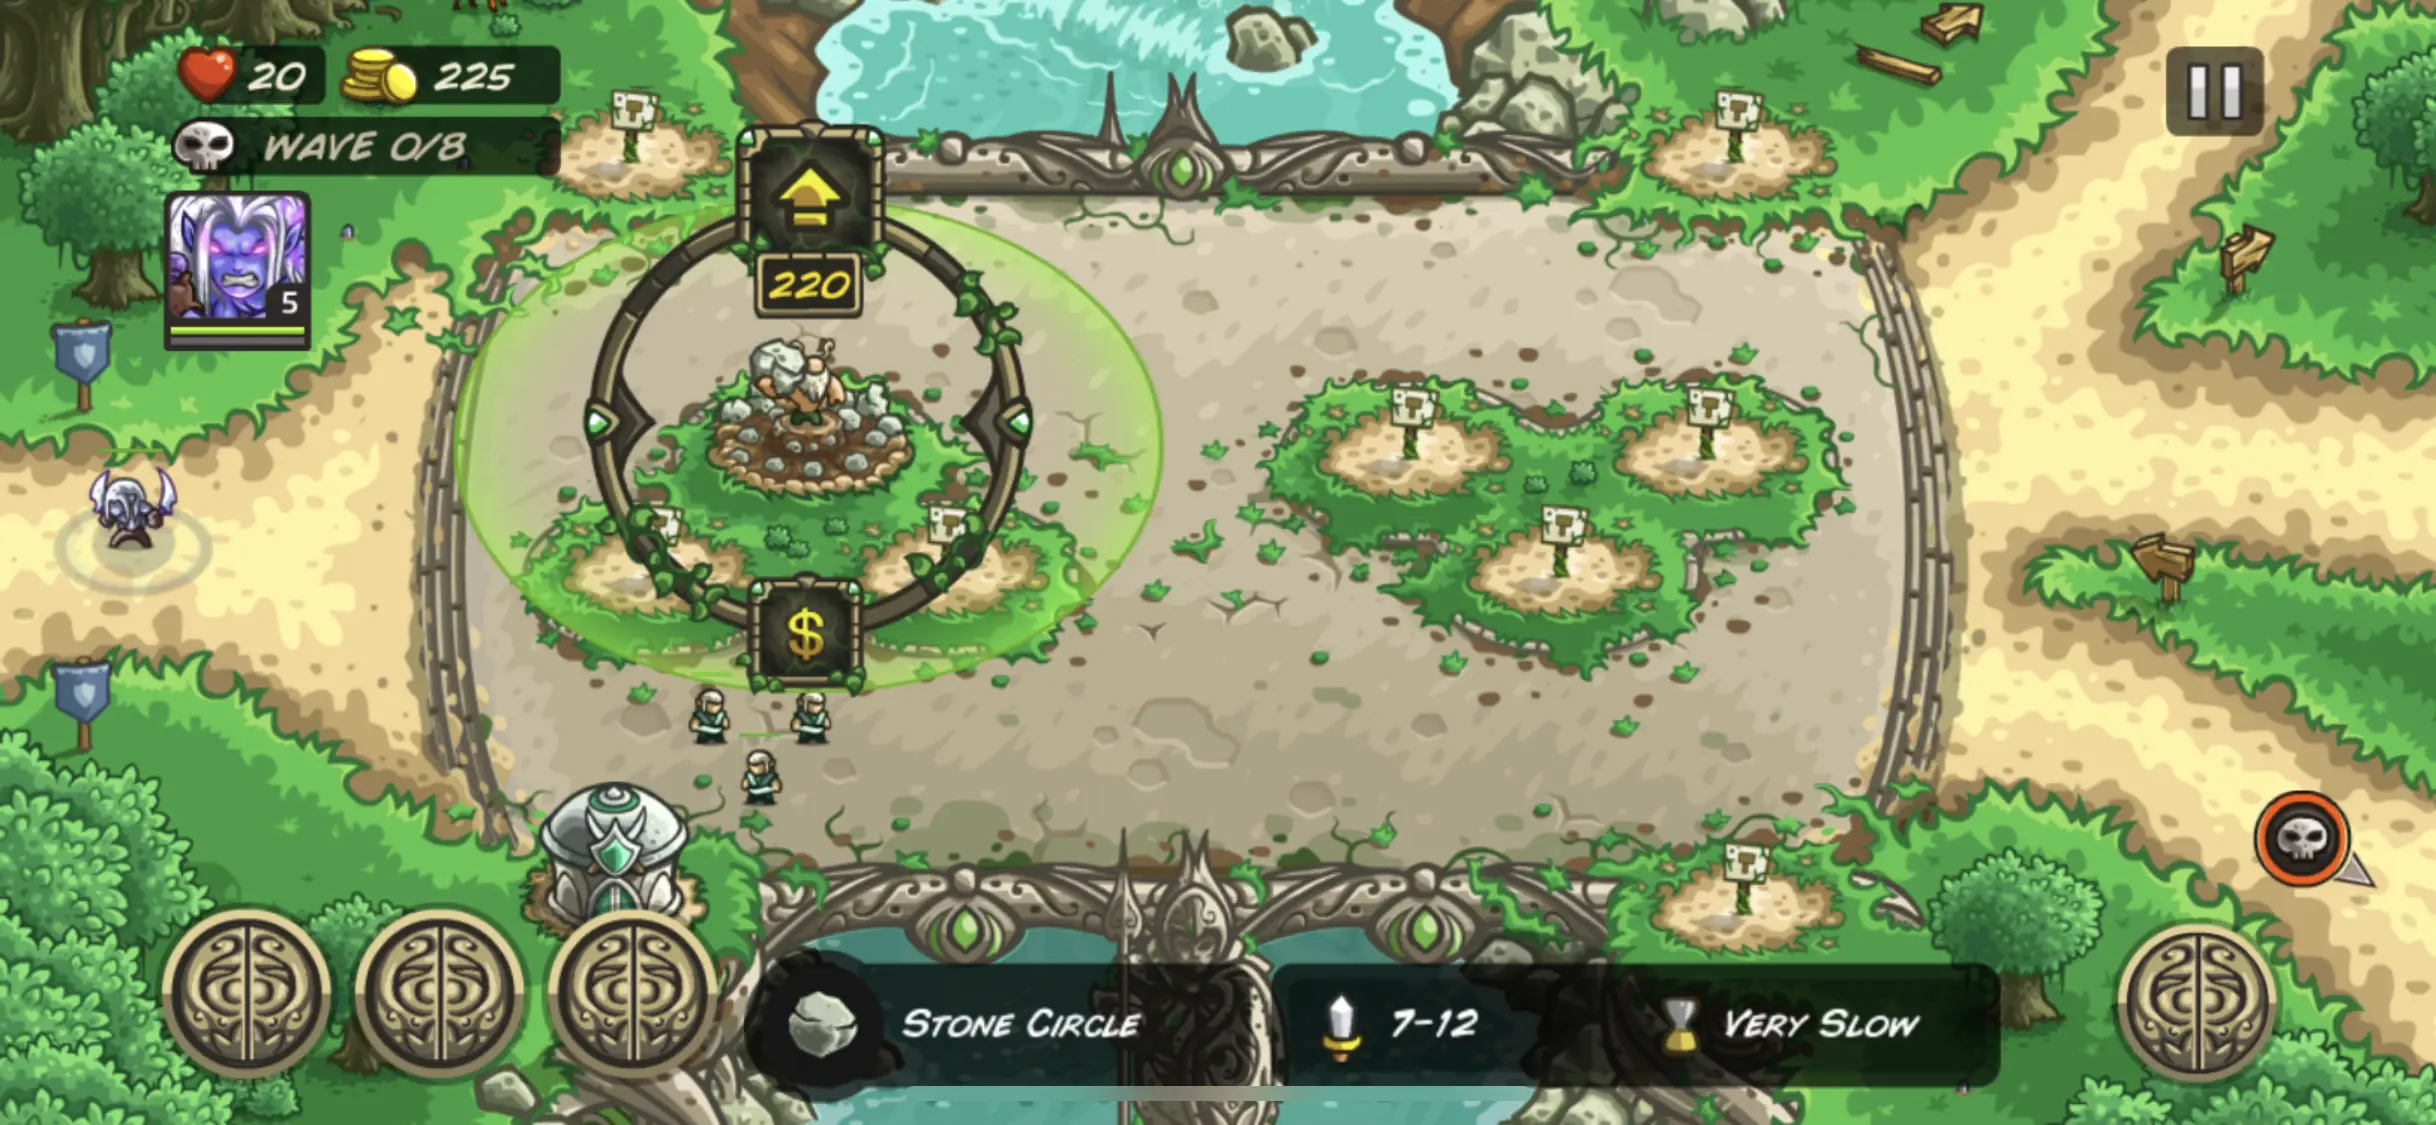 Level map showing a tower selected with the ability to upgrade for 200 gold